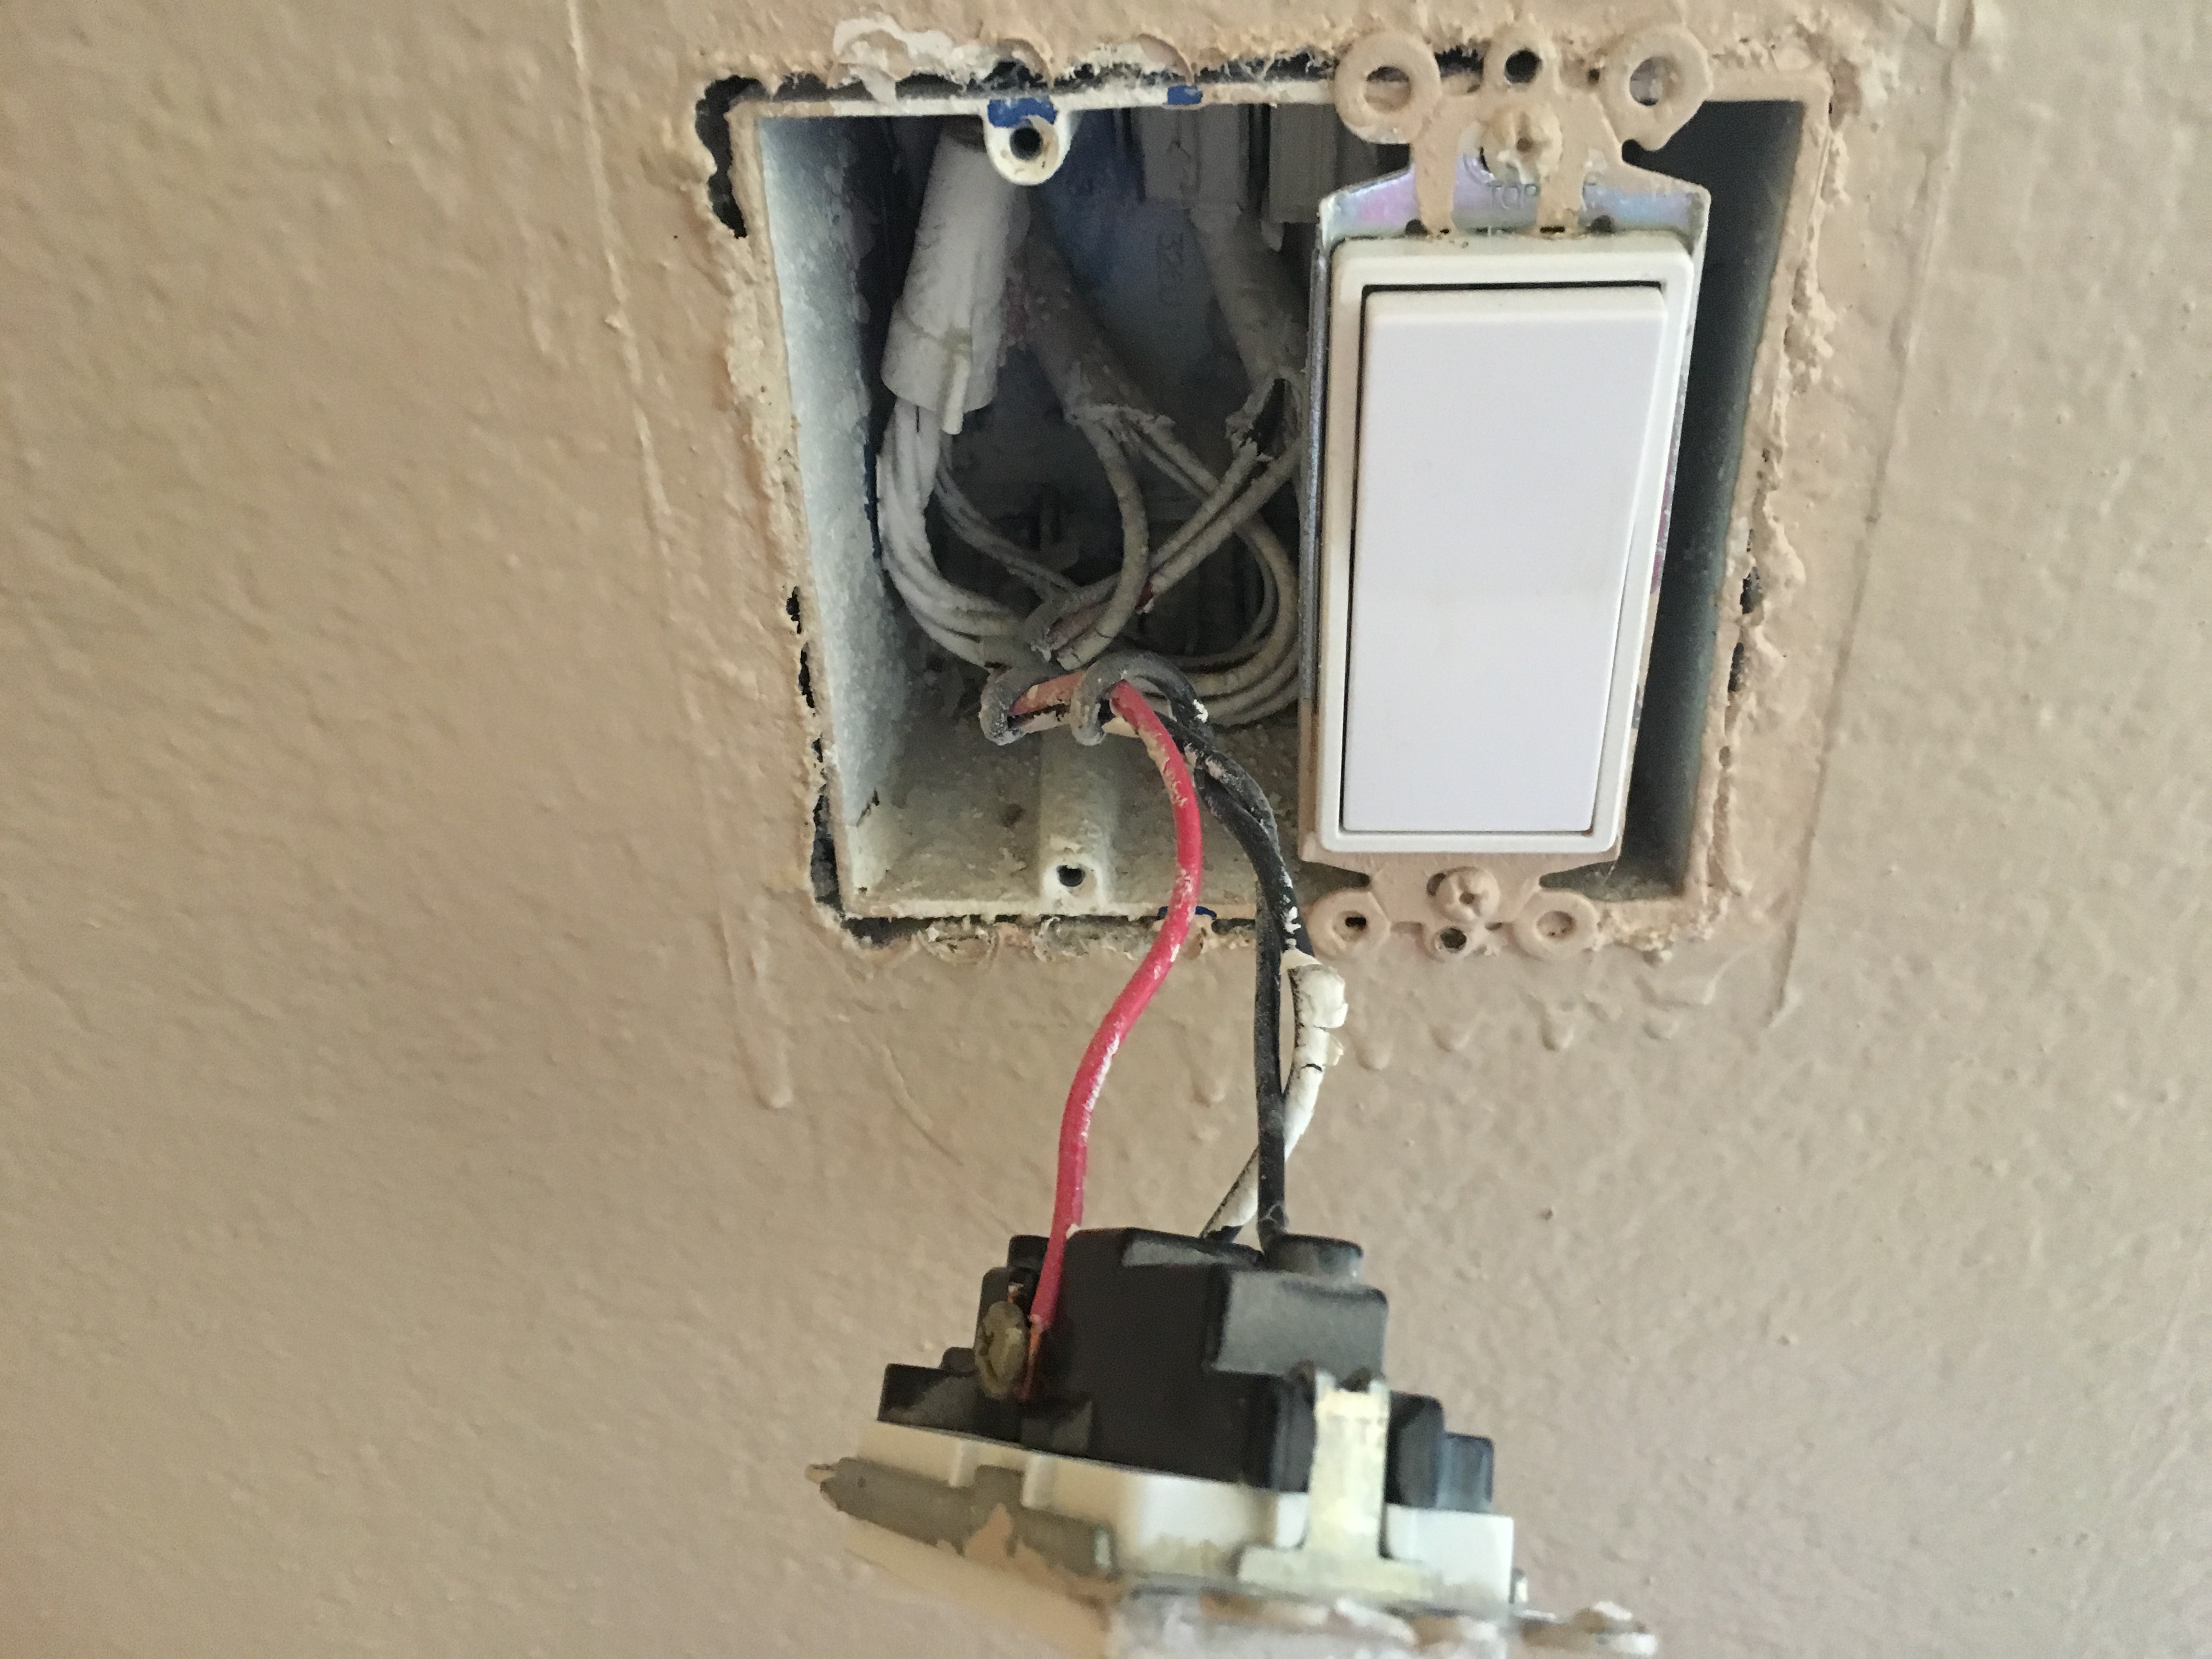 Permalink to Ceiling Fan And Light Single Switch